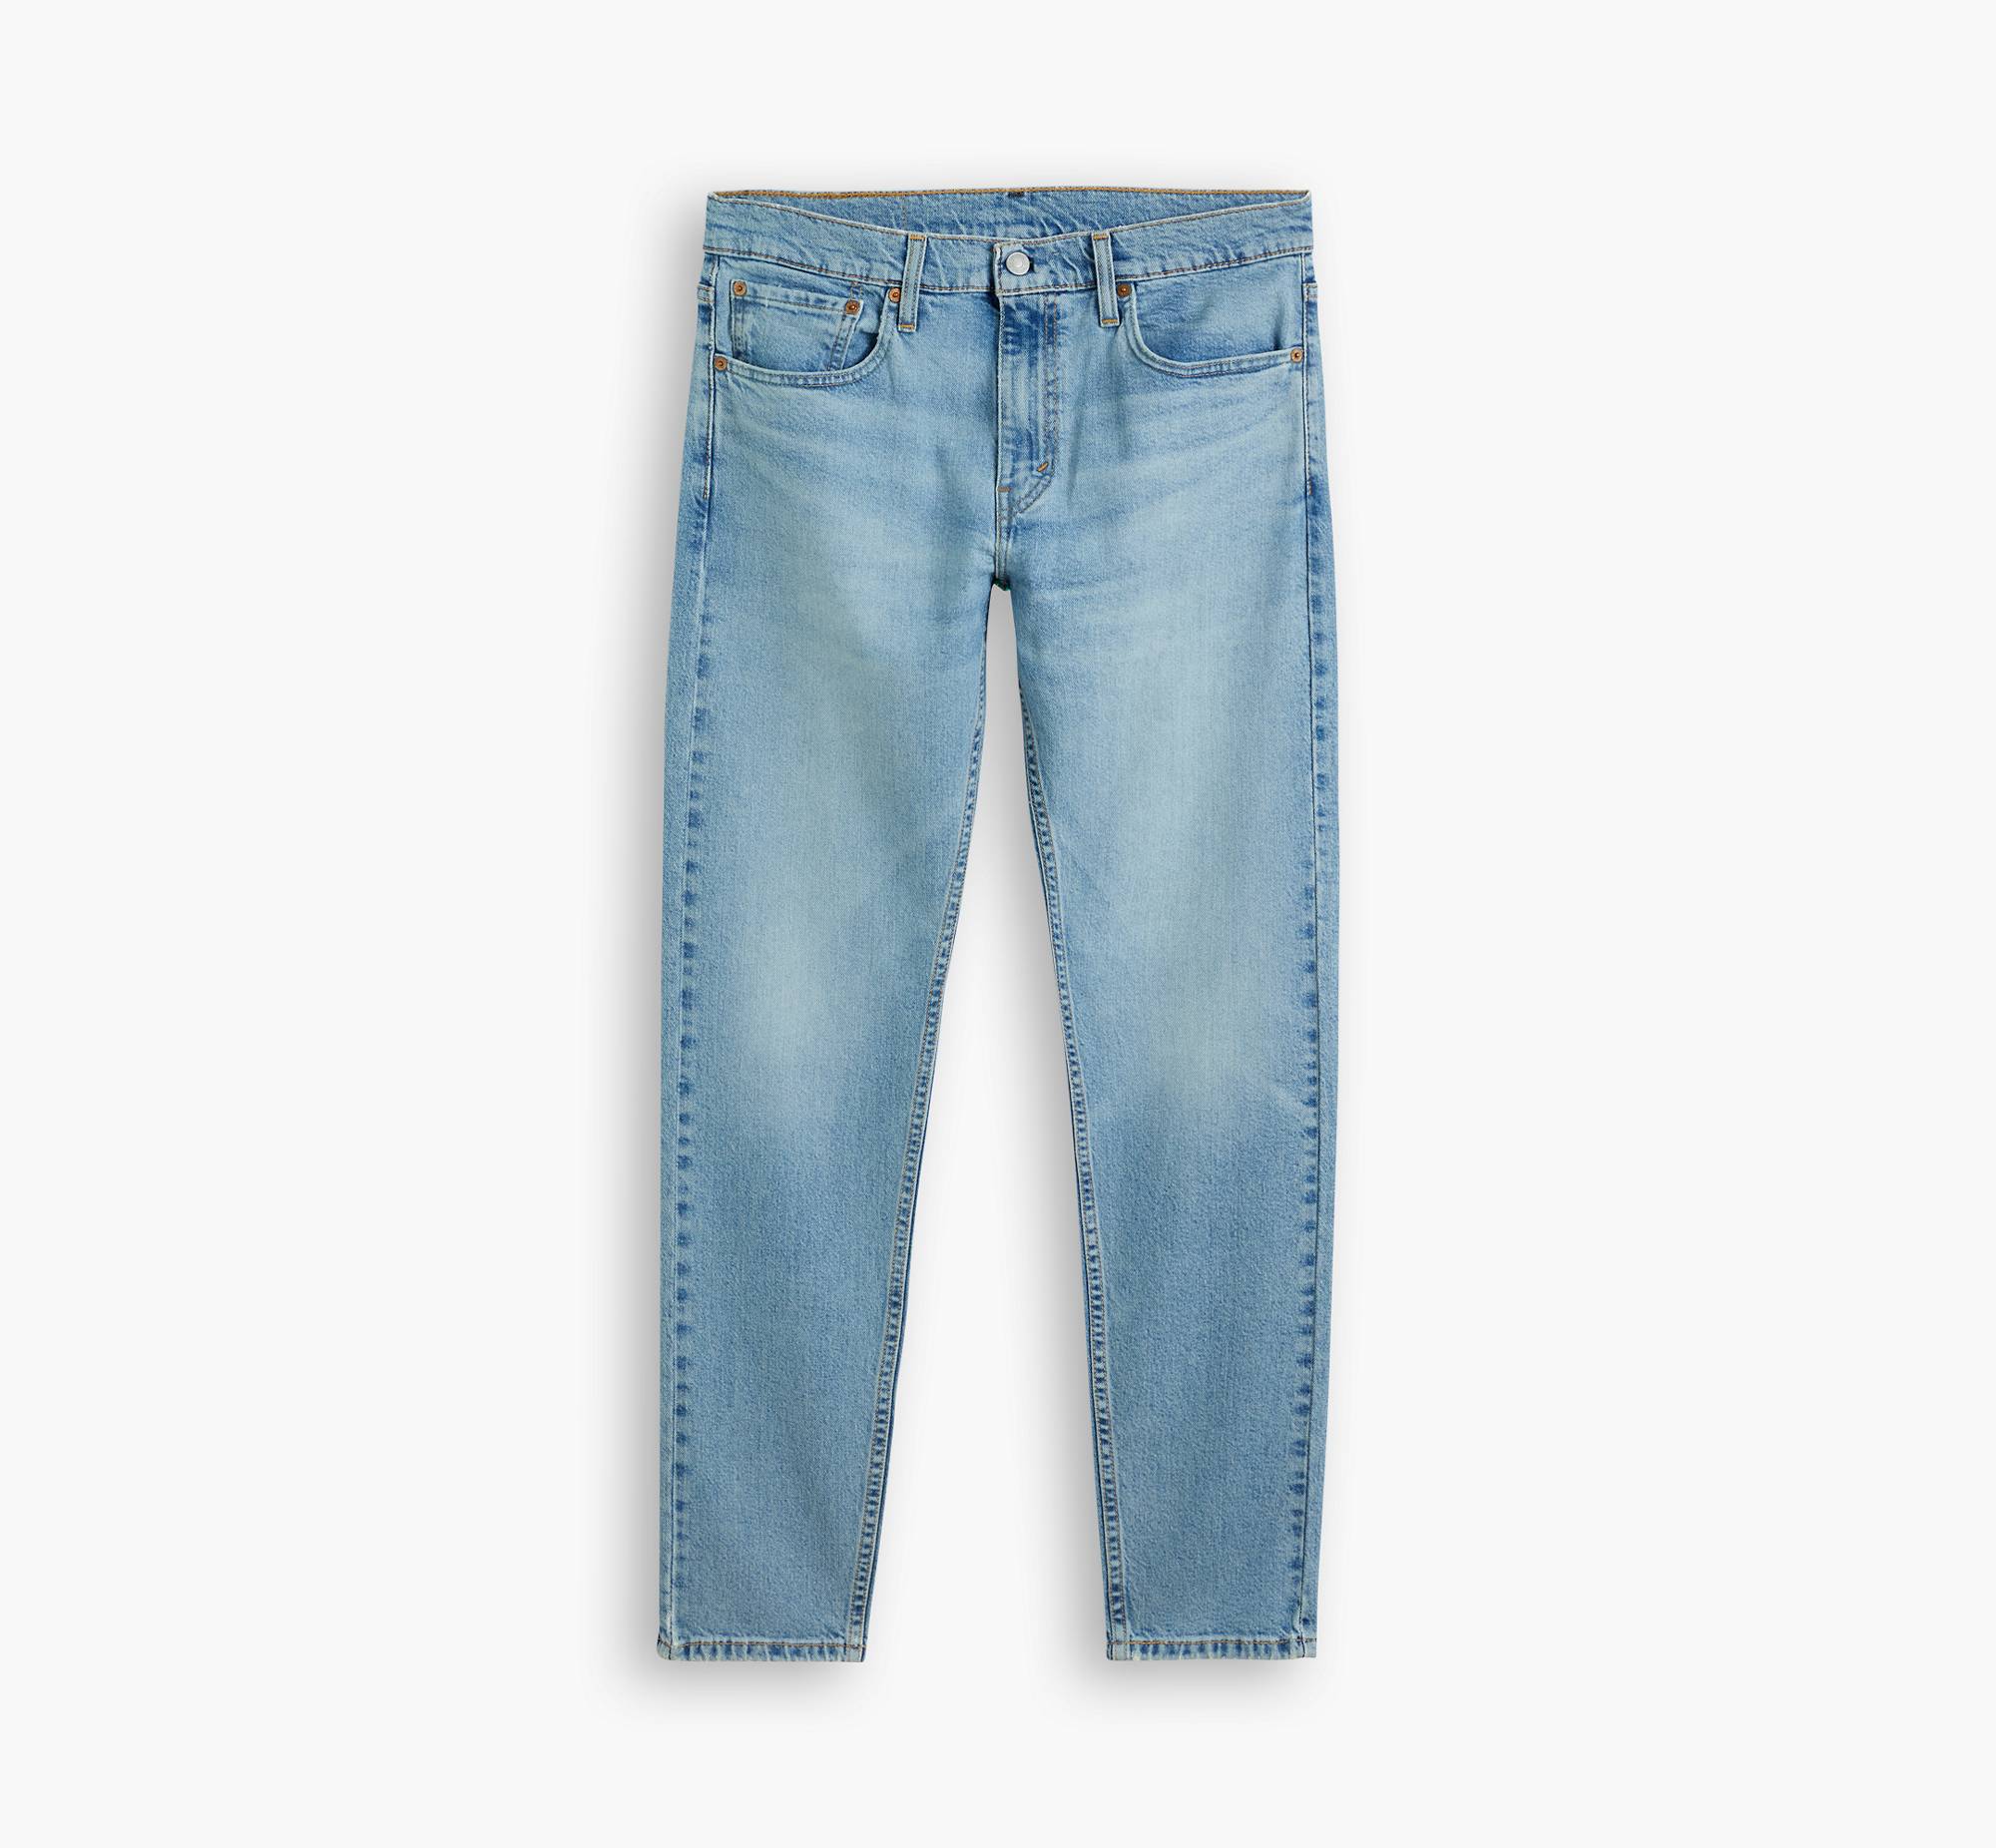 512™ Slim Tapered Lo-Ball Jeans 6